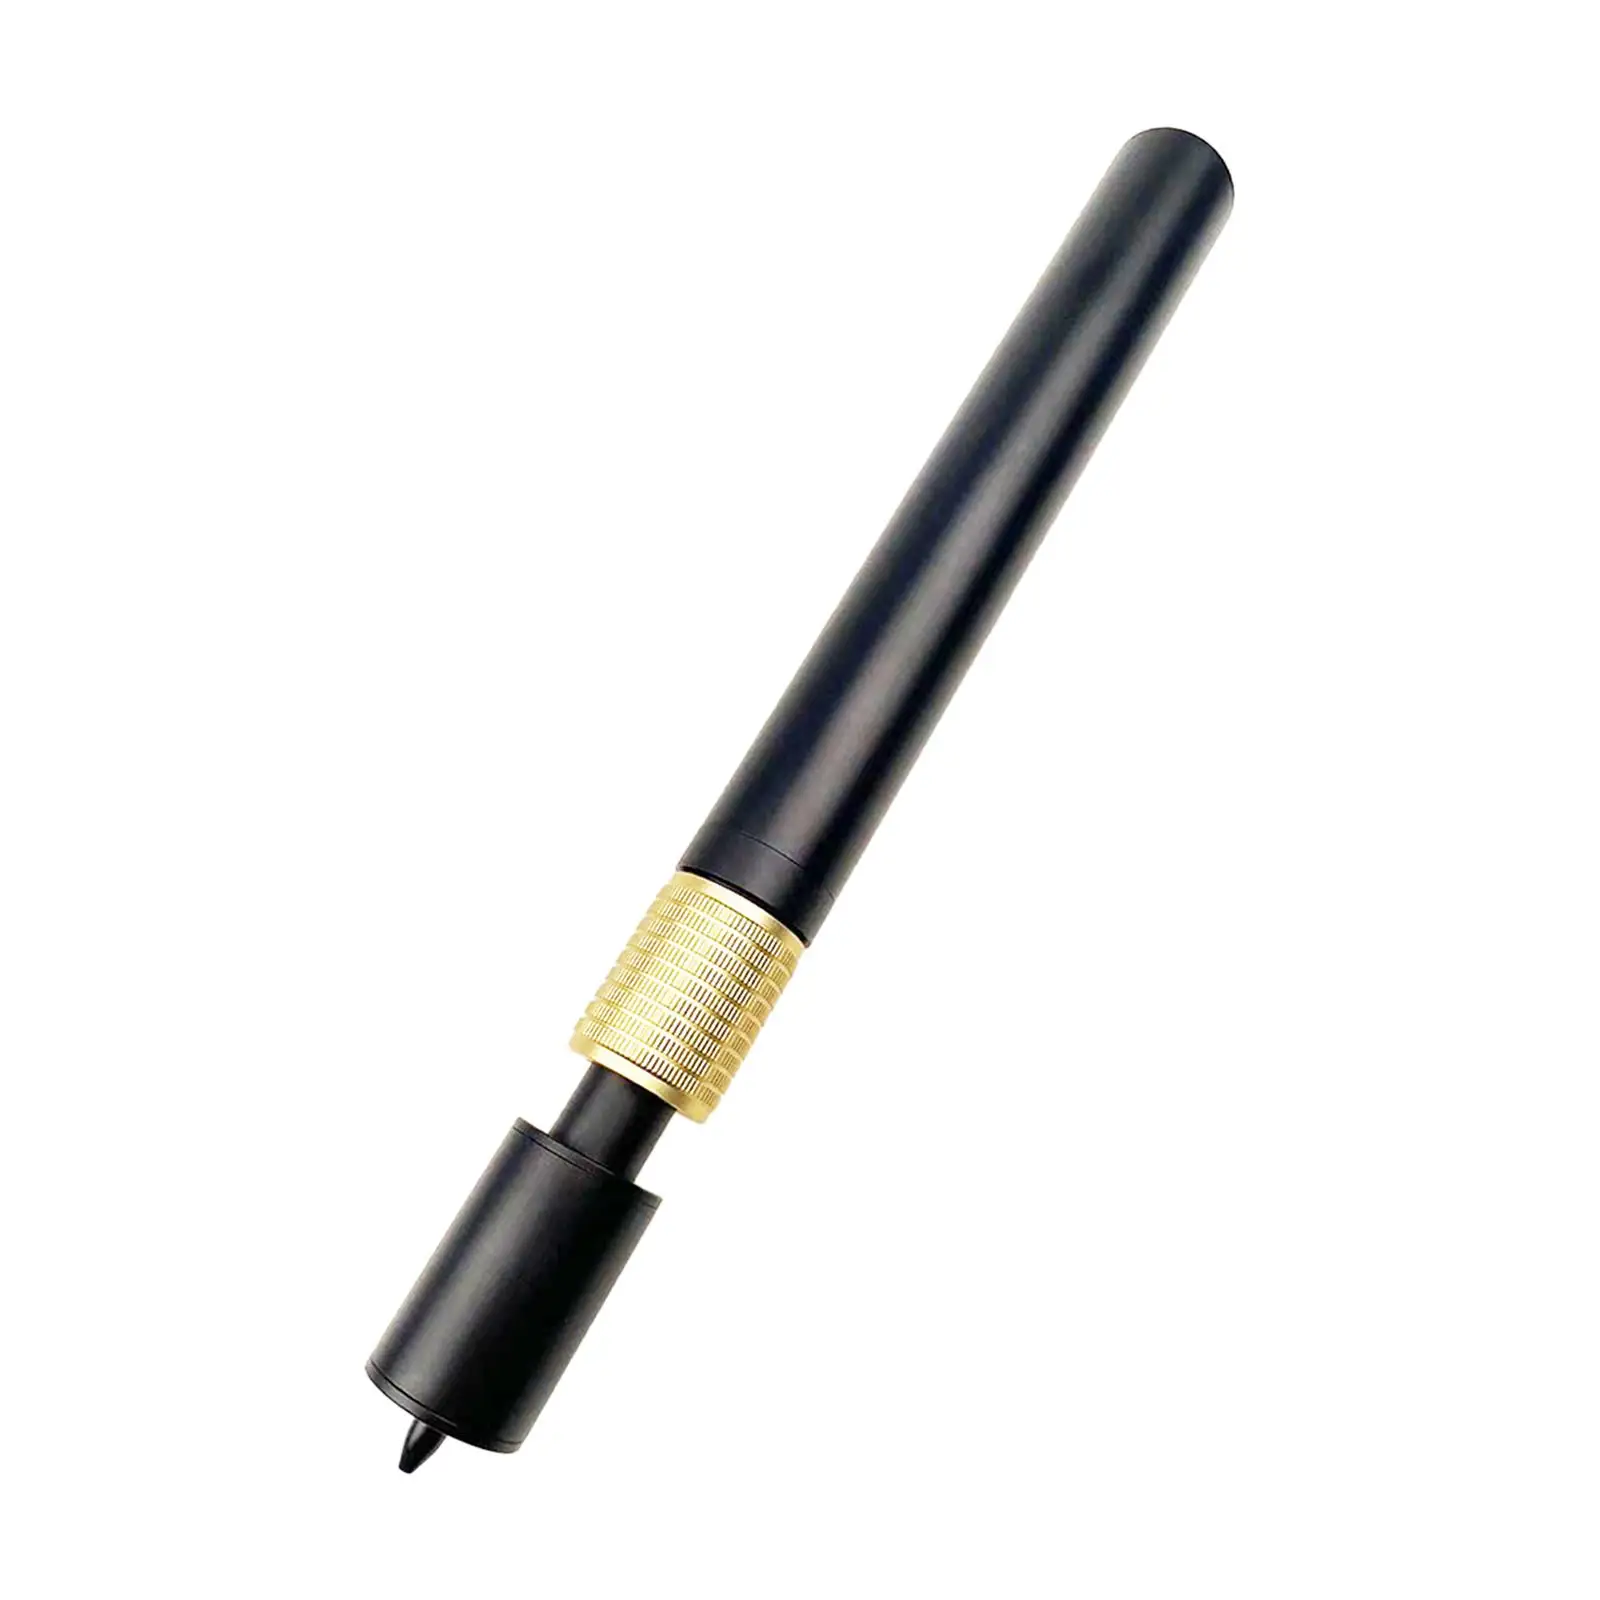 Billiards Pool Cue Extension End Lengthener Portable Cue Extended Weights